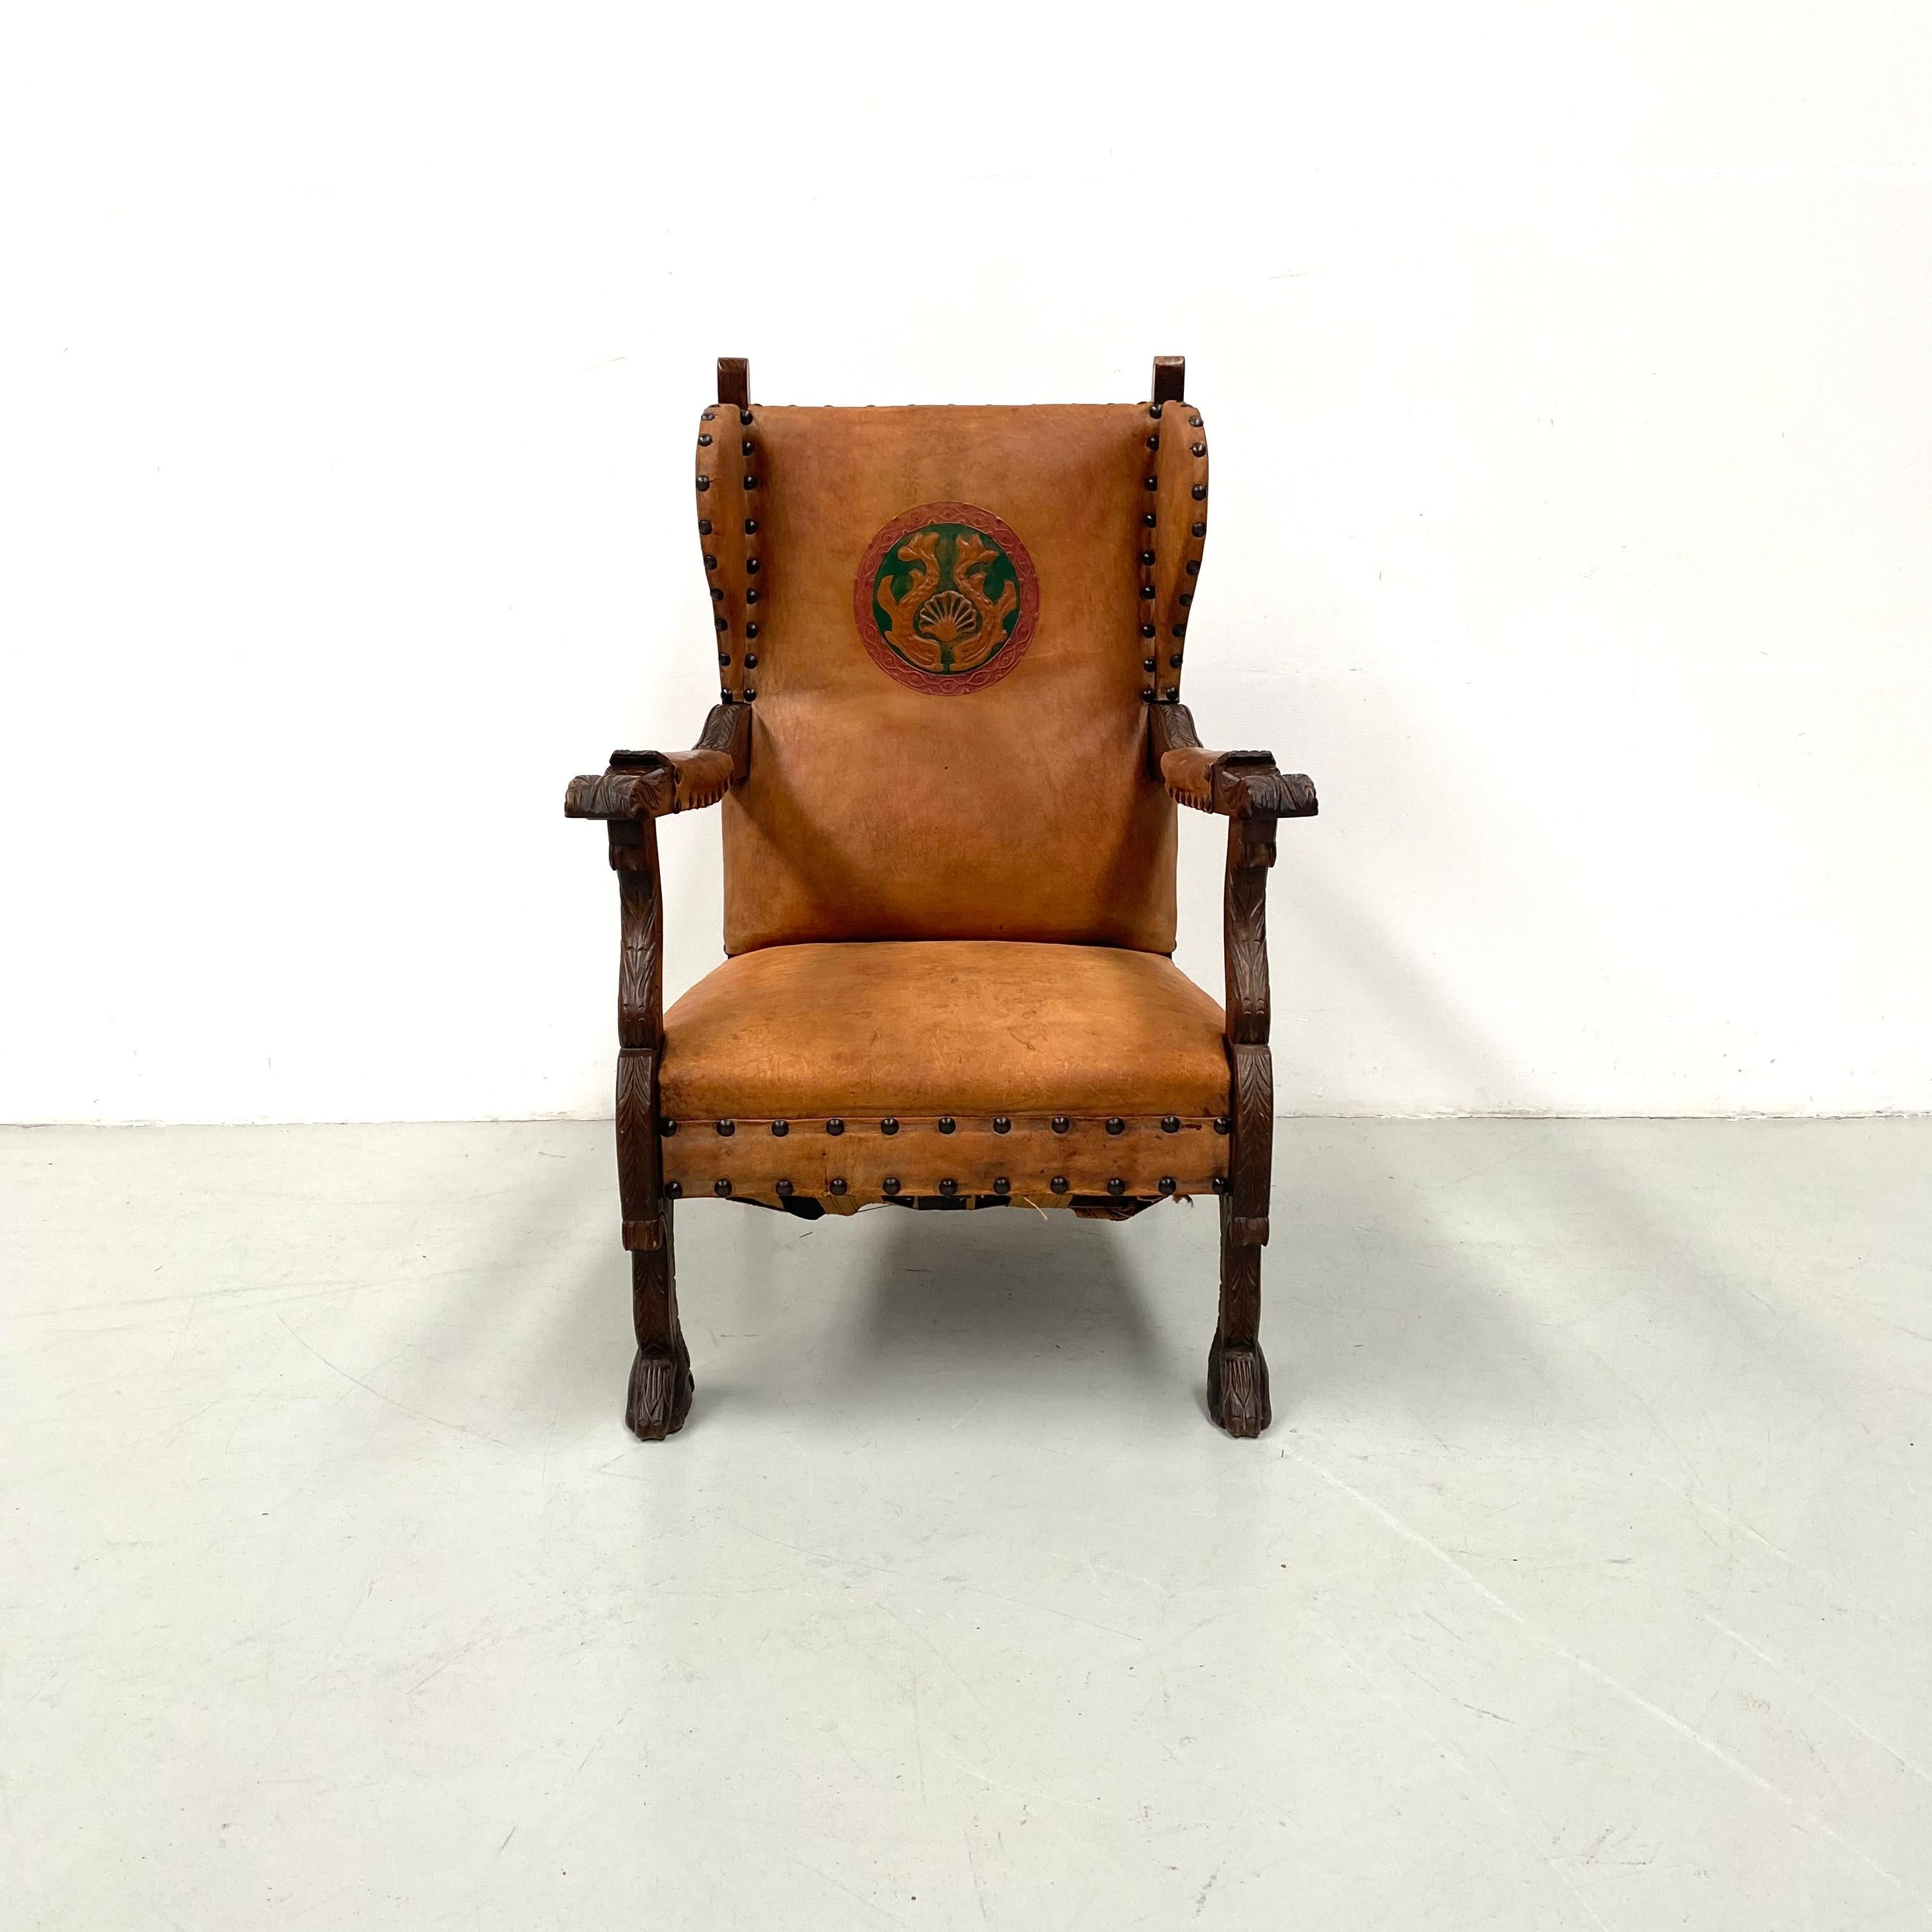 Early 20th Century Antique French Wingchair in Cognac Leather with Carvings, 1920s.